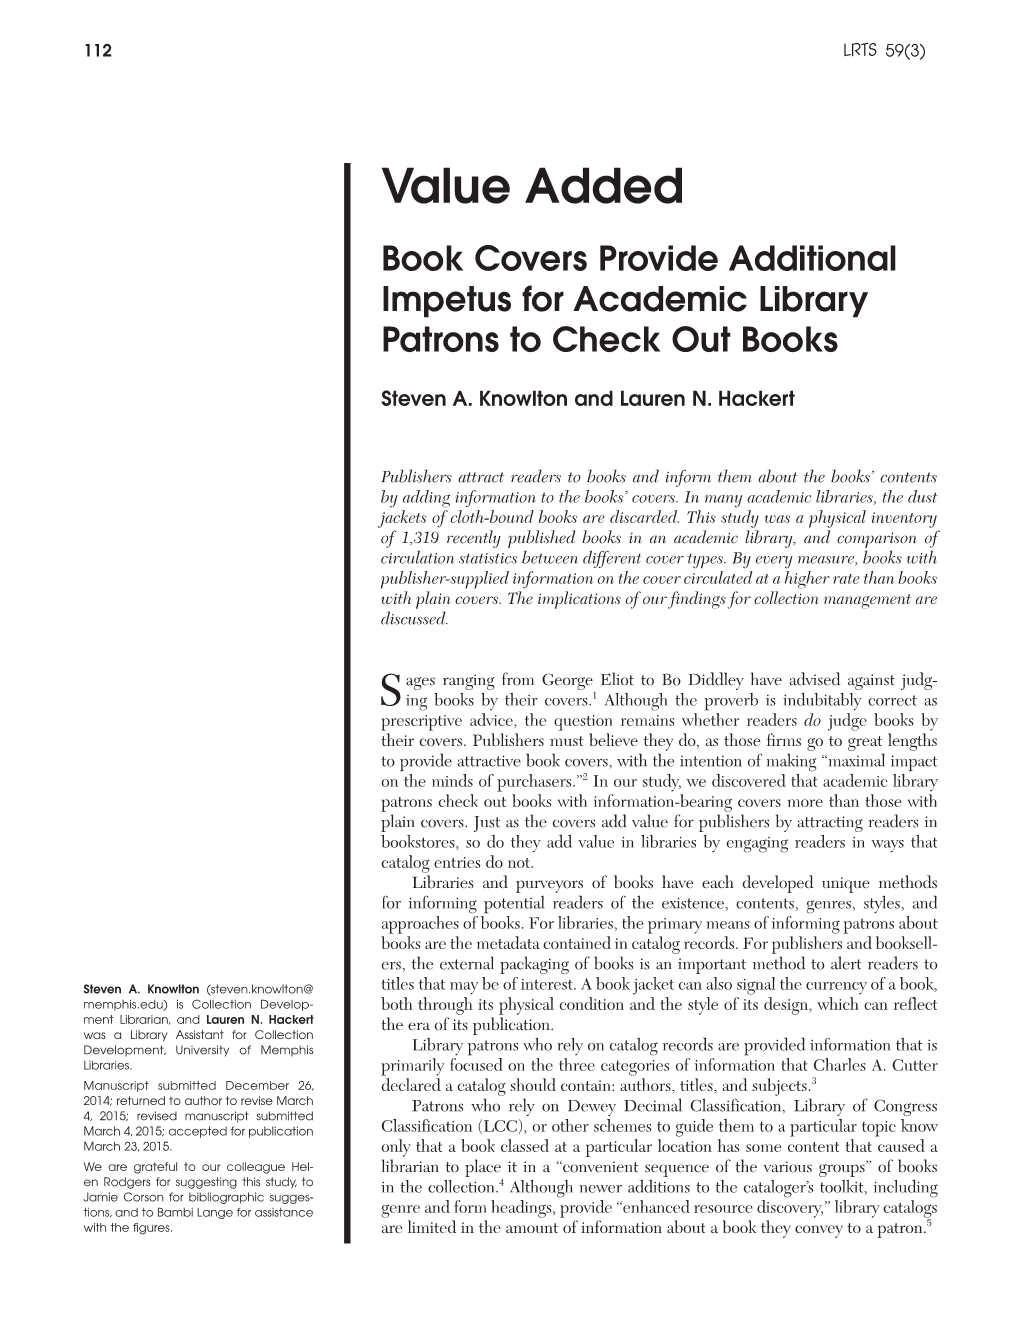 Value Added Book Covers Provide Additional Impetus for Academic Library Patrons to Check out Books